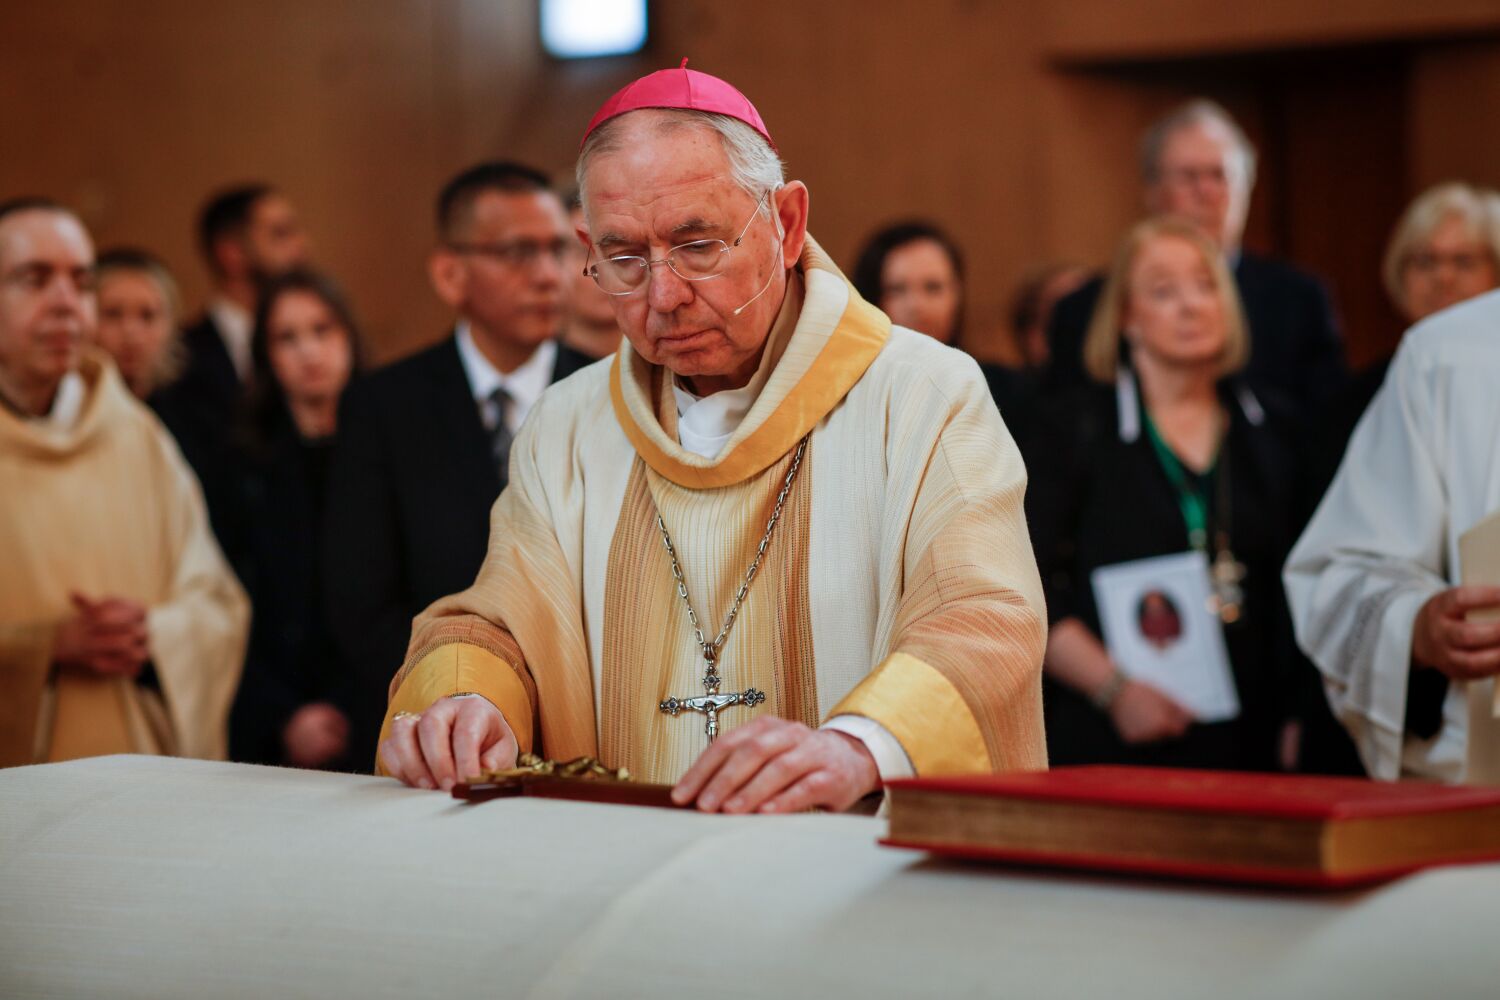 'Gripped by grace': Thousands gather for Bishop O'Connell's funeral Mass